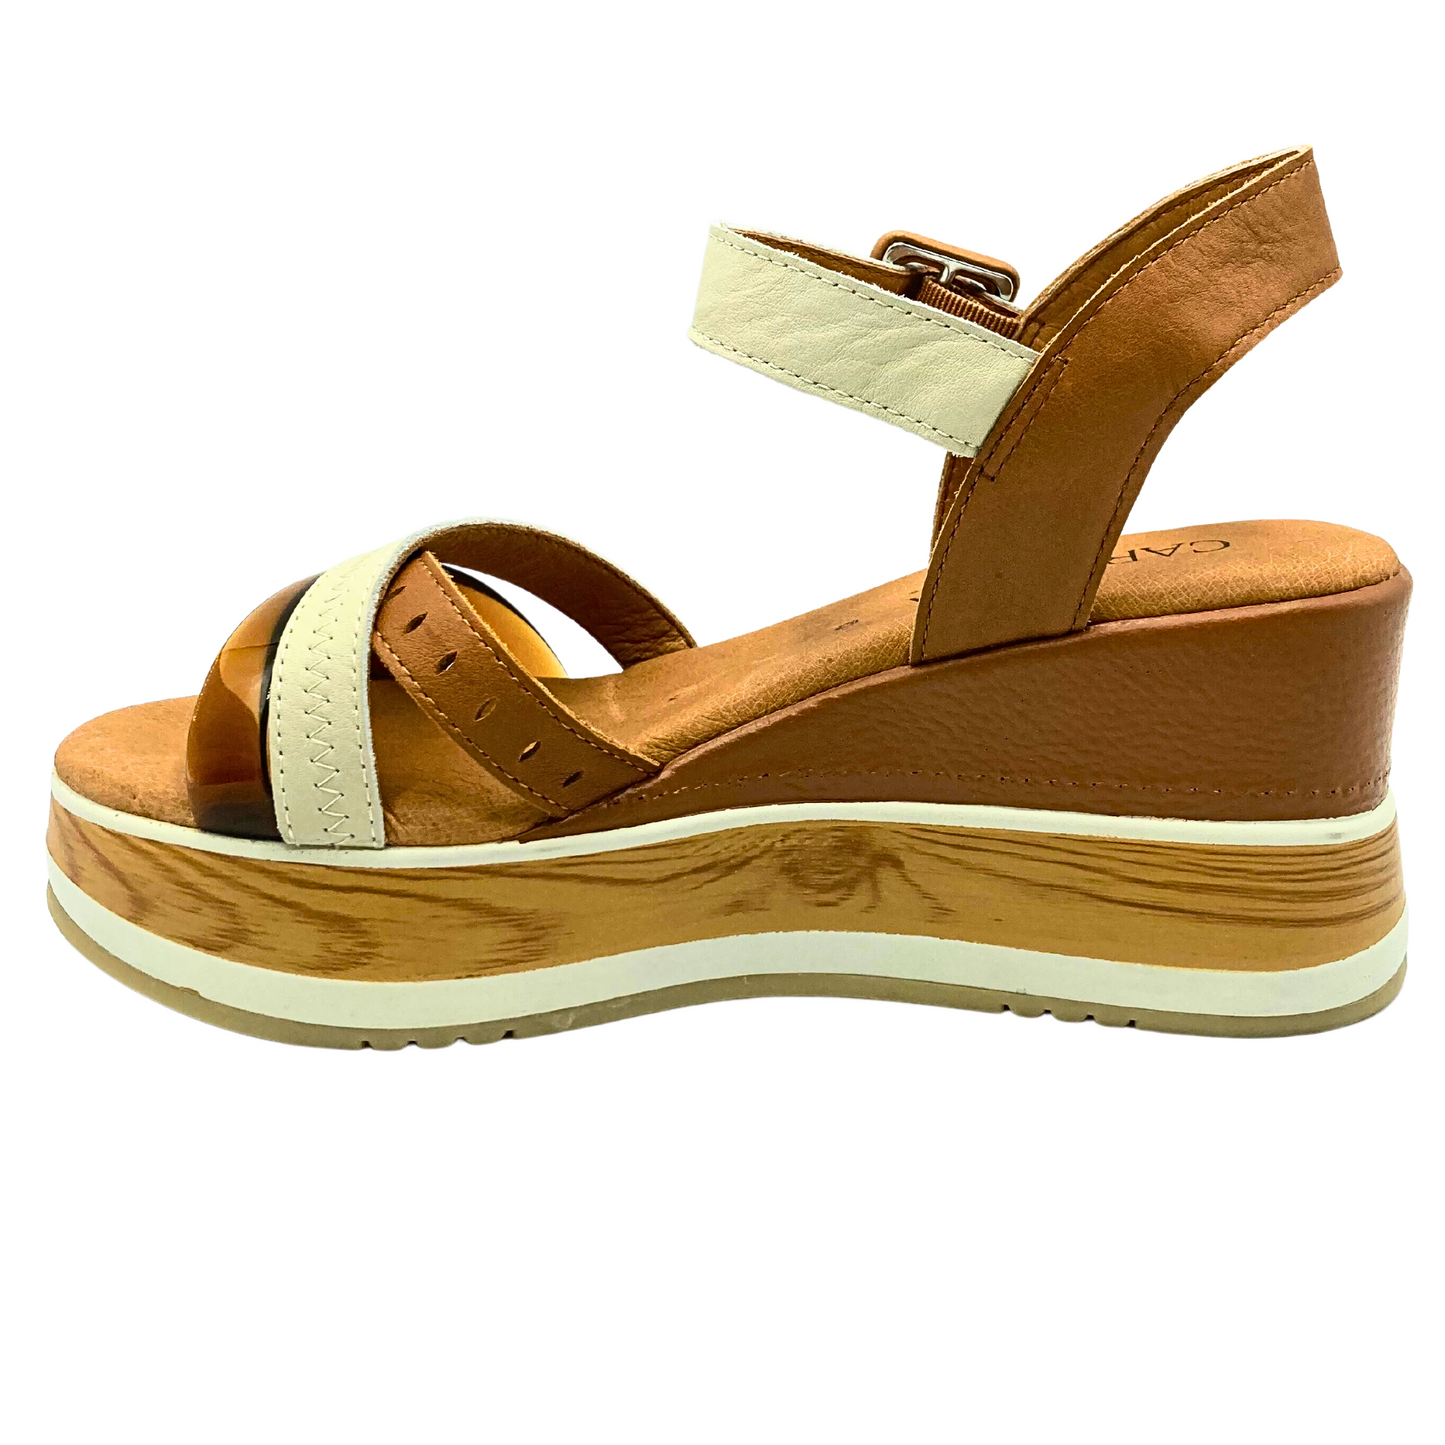 Inside view of wedge sandal with lots of variations in color and texture.  Open toe and heel but does have a back and ankle strap.  Three criss cross straps at the front and a faux wood panel in the platform wedge